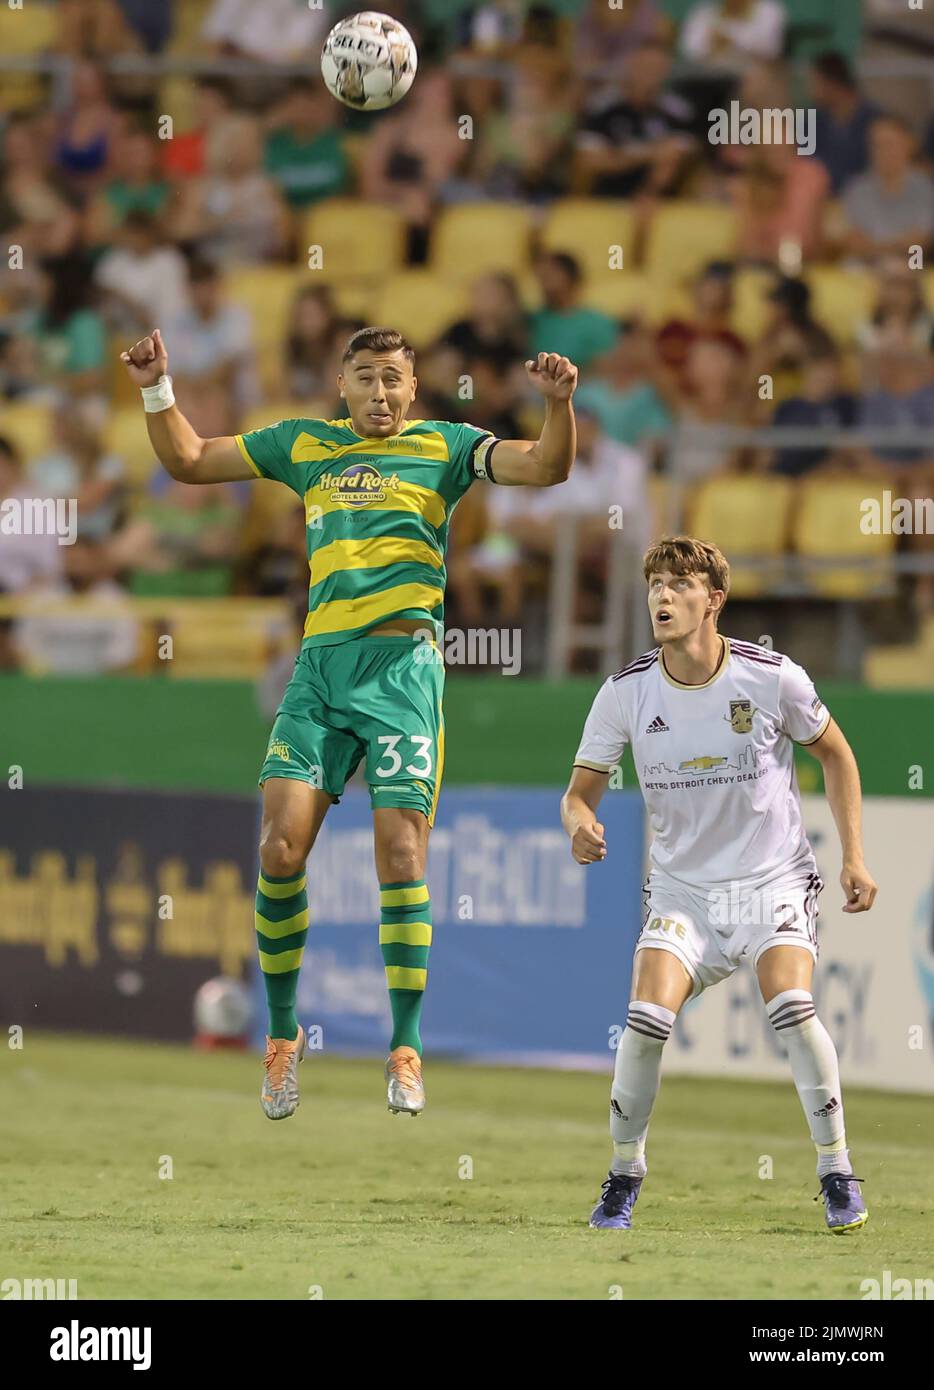 St. Petersburg, FL: Tampa Bay Rowdies defender Aaron Guillen (33) heads the ball during a USL soccer game against Detroit City, Saturday, August 6, 20 Stock Photo